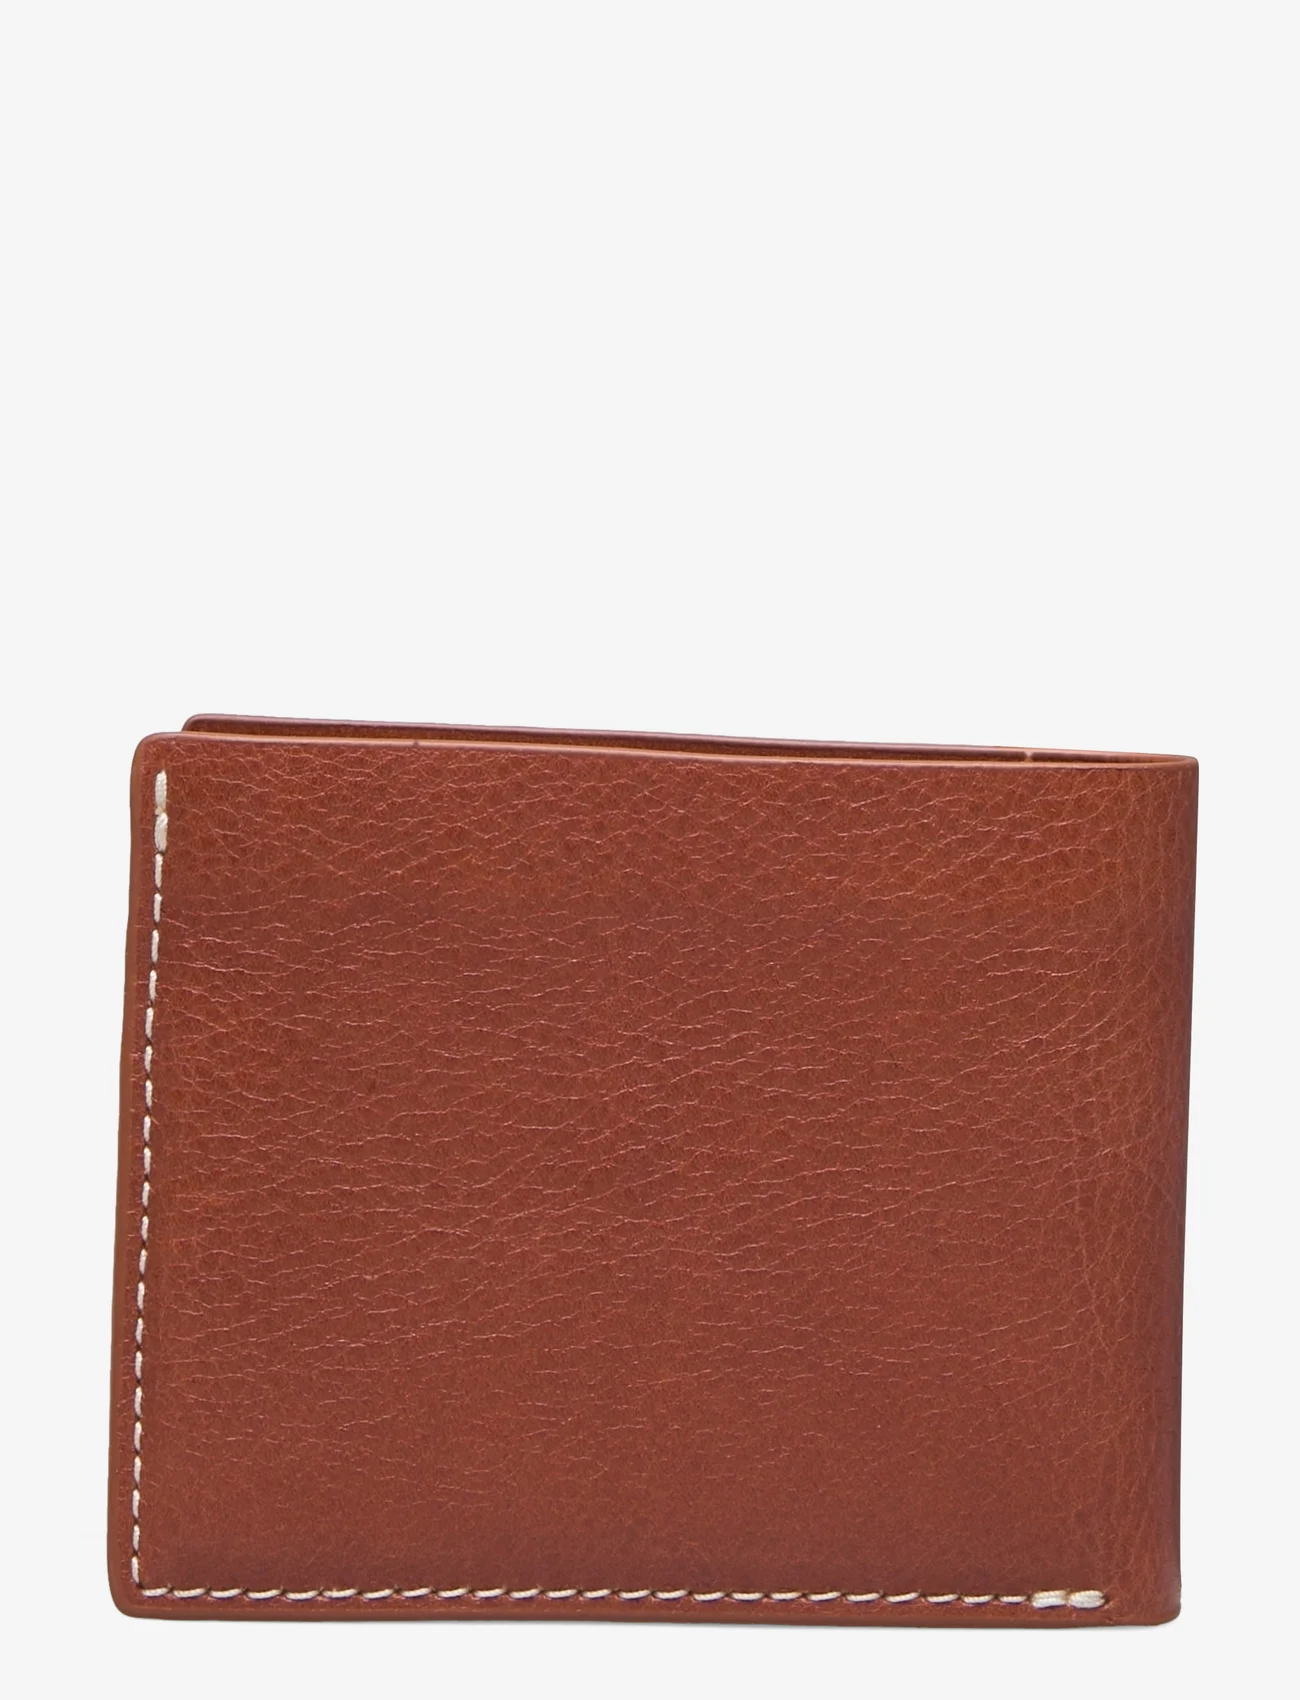 GANT - LEATHER WALLET - punge - clay brown - 1